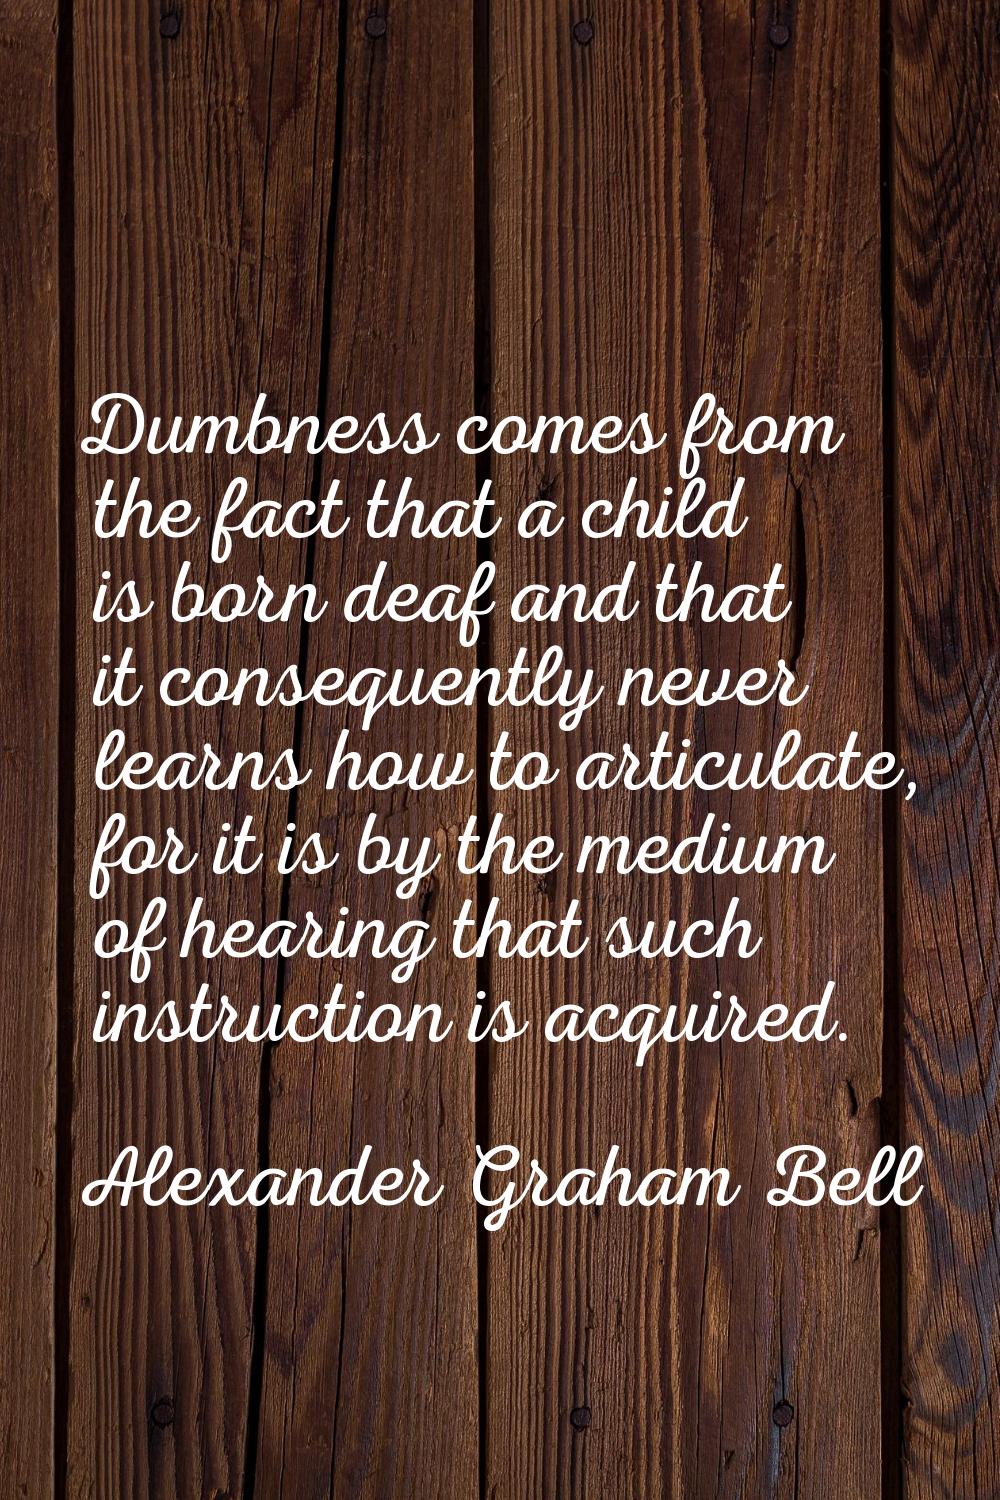 Dumbness comes from the fact that a child is born deaf and that it consequently never learns how to